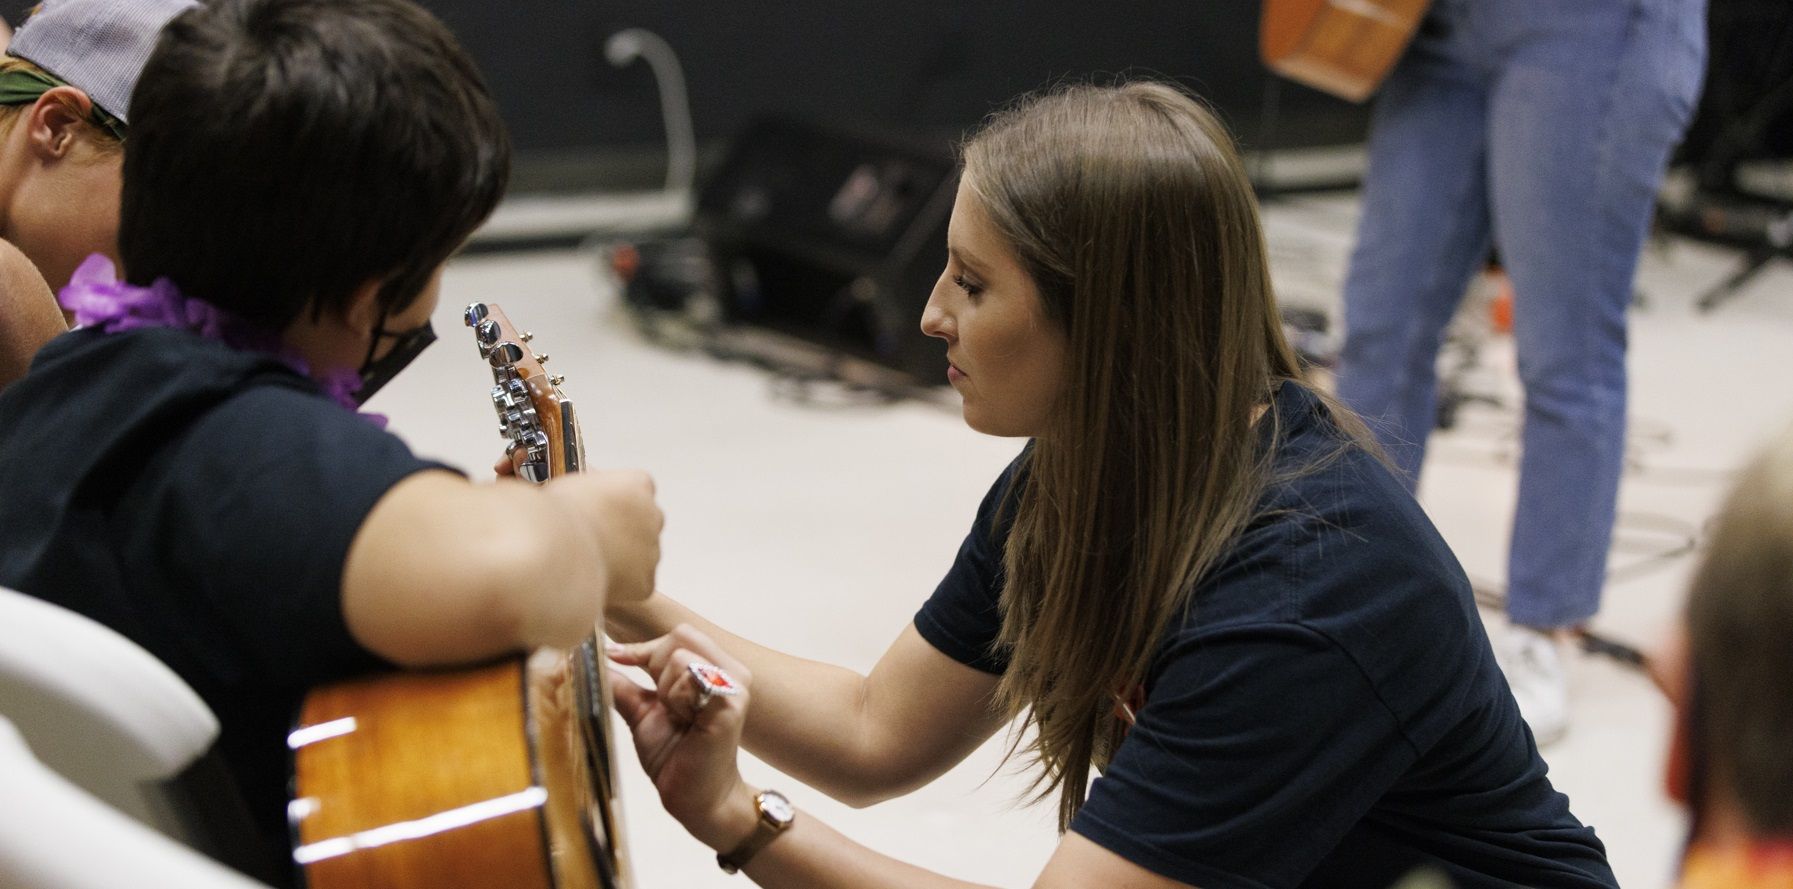 music teacher helping student with guitar